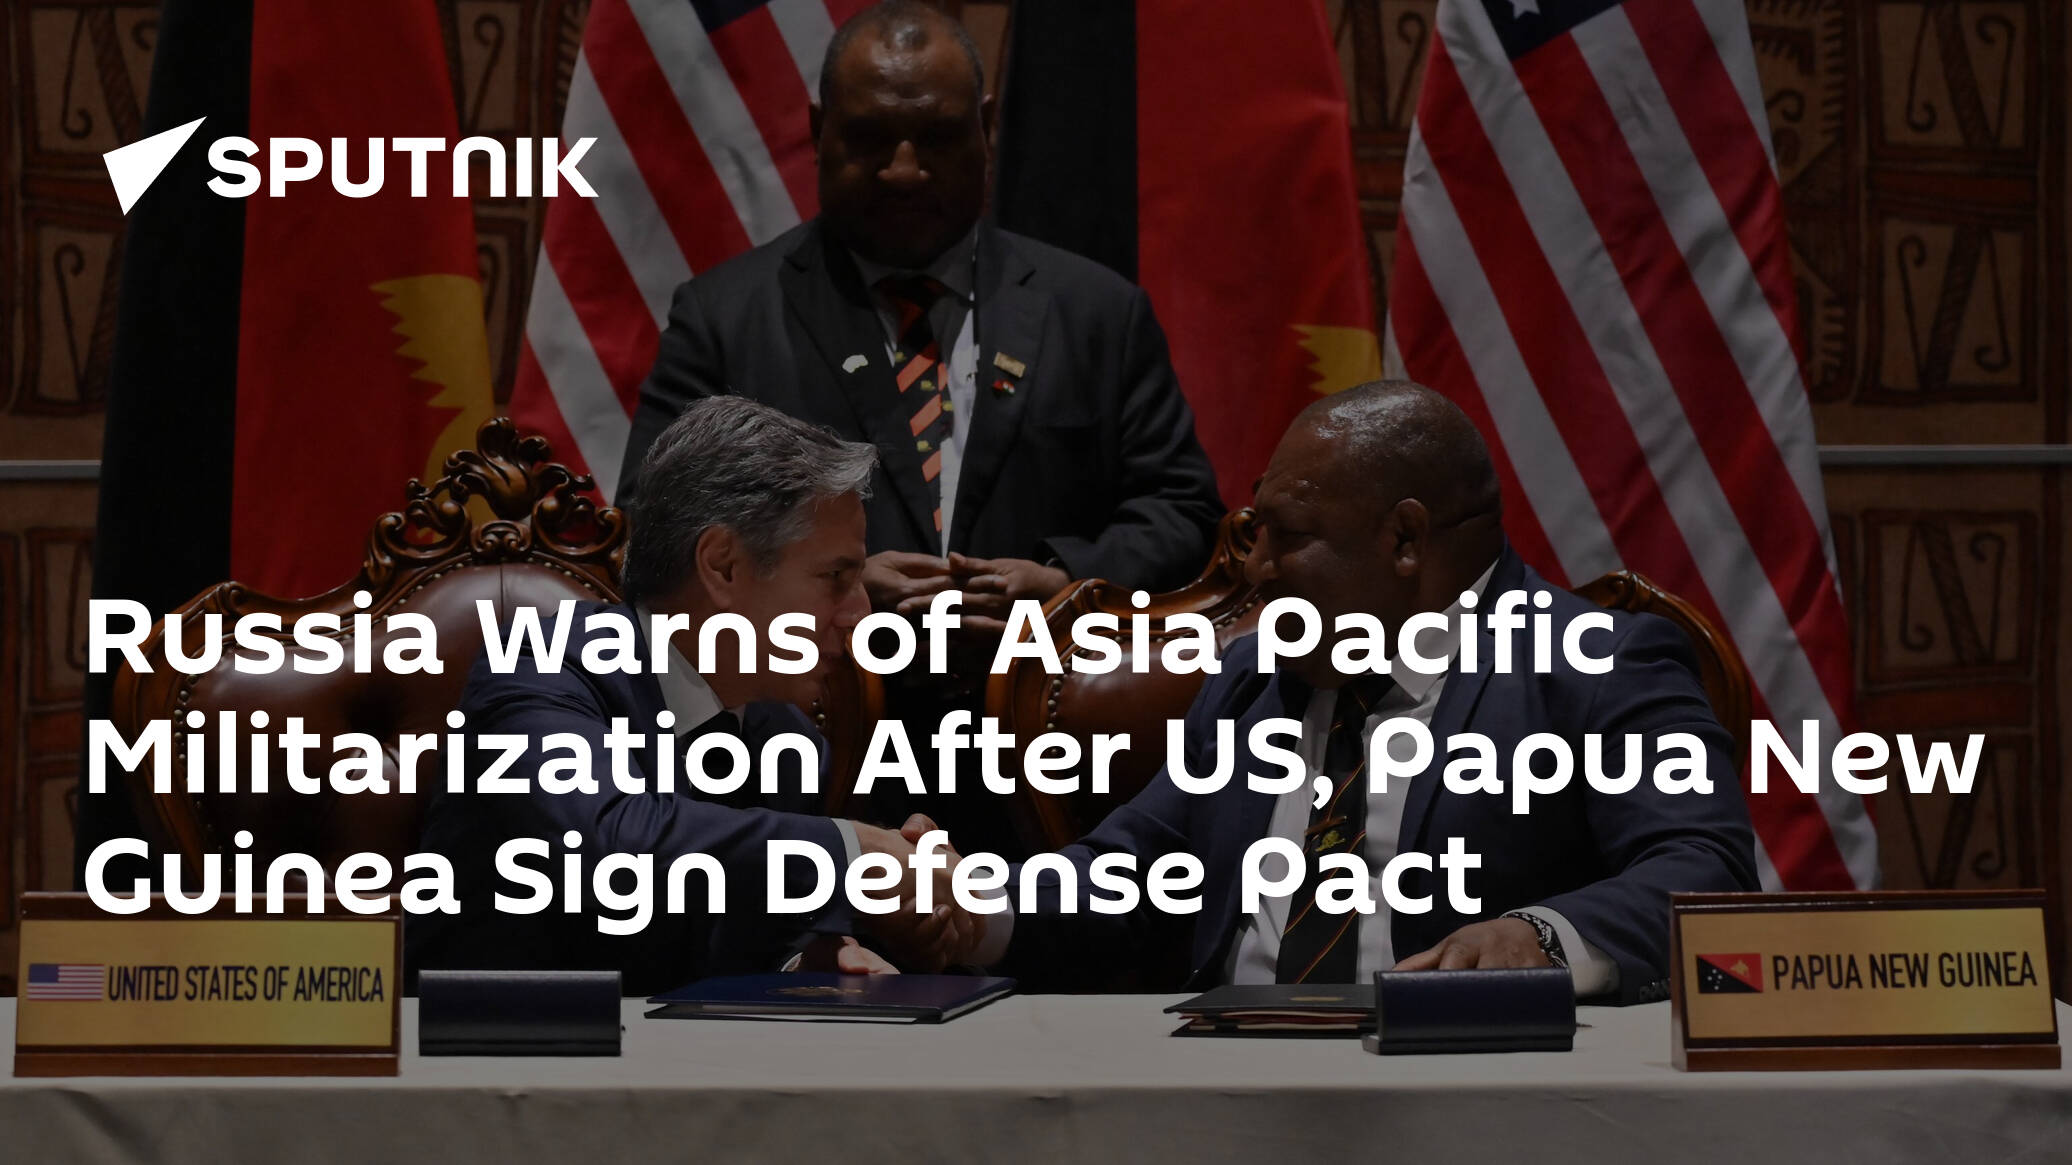 Russia Warns of Asia Pacific Militarization After US, Papua New Guinea Sign Defense Pact